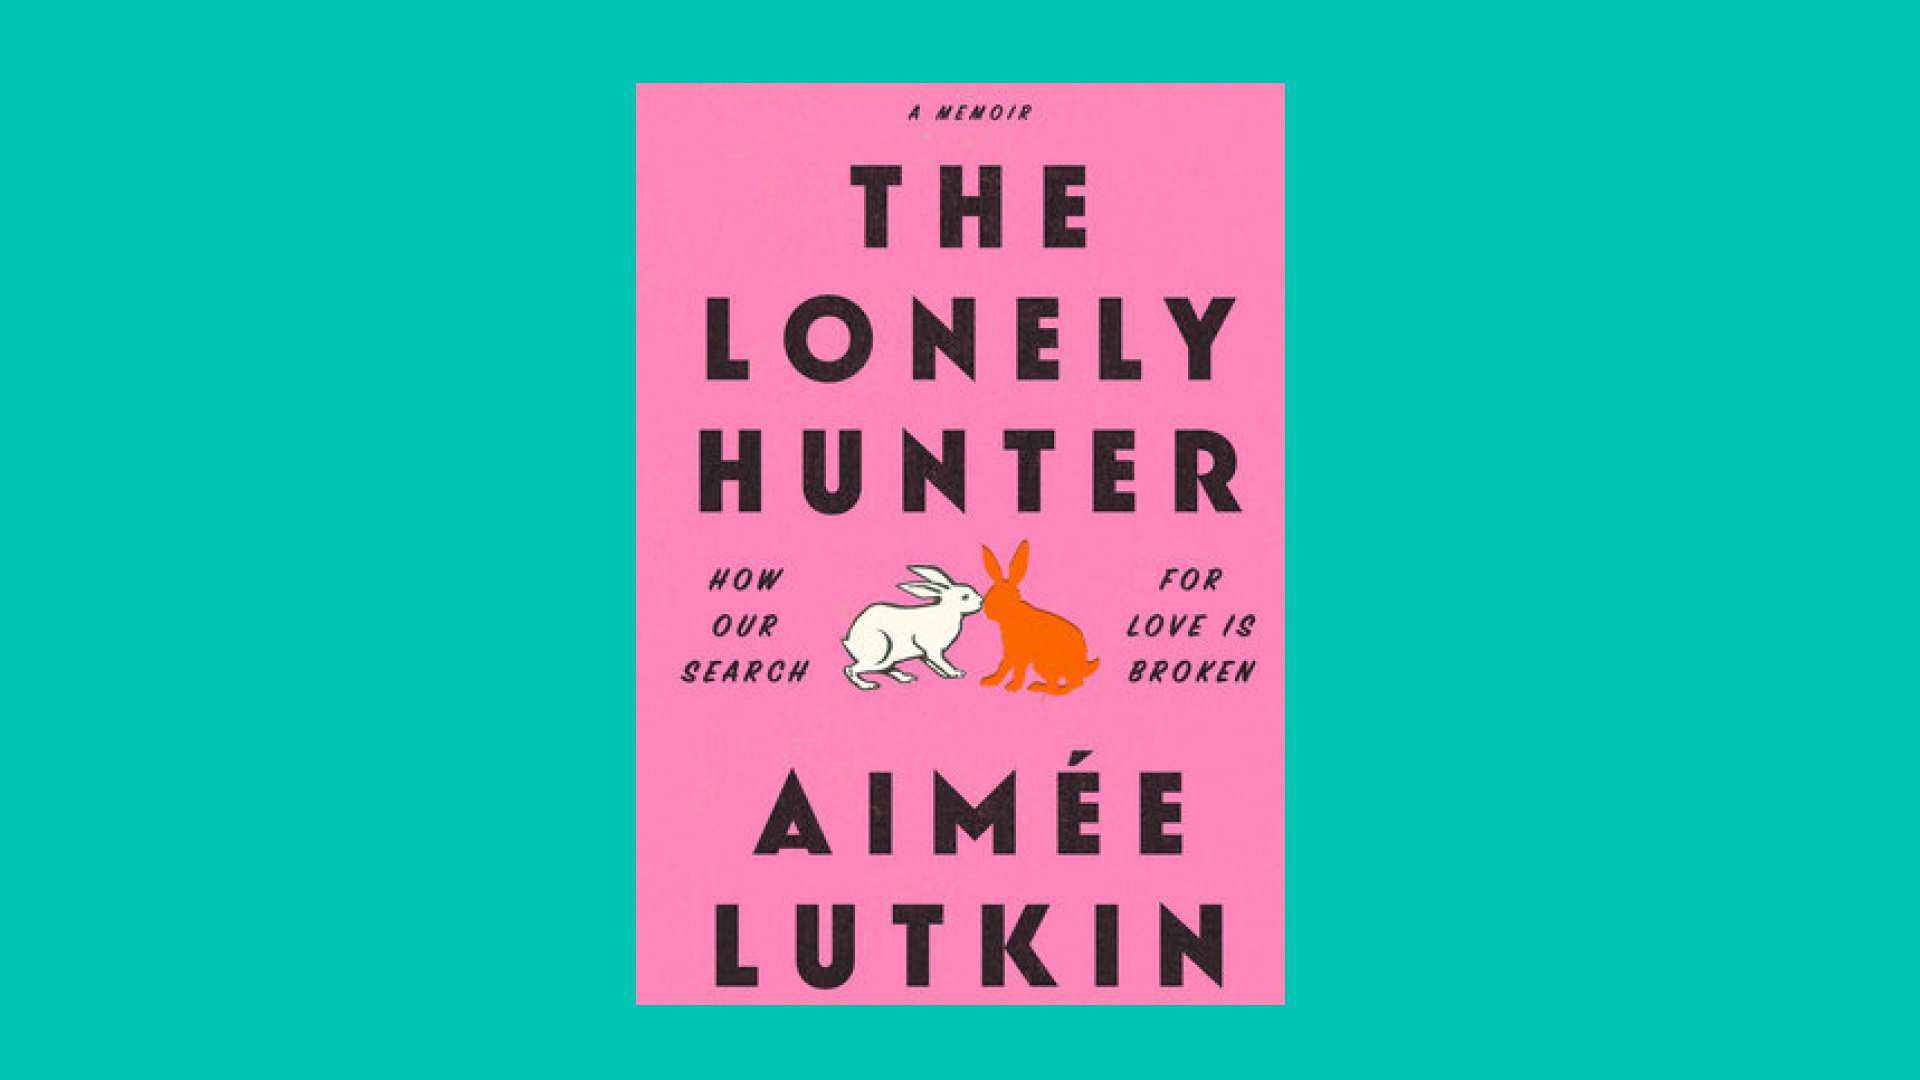 “The Lonely Hunter” by Aimée Lutkin